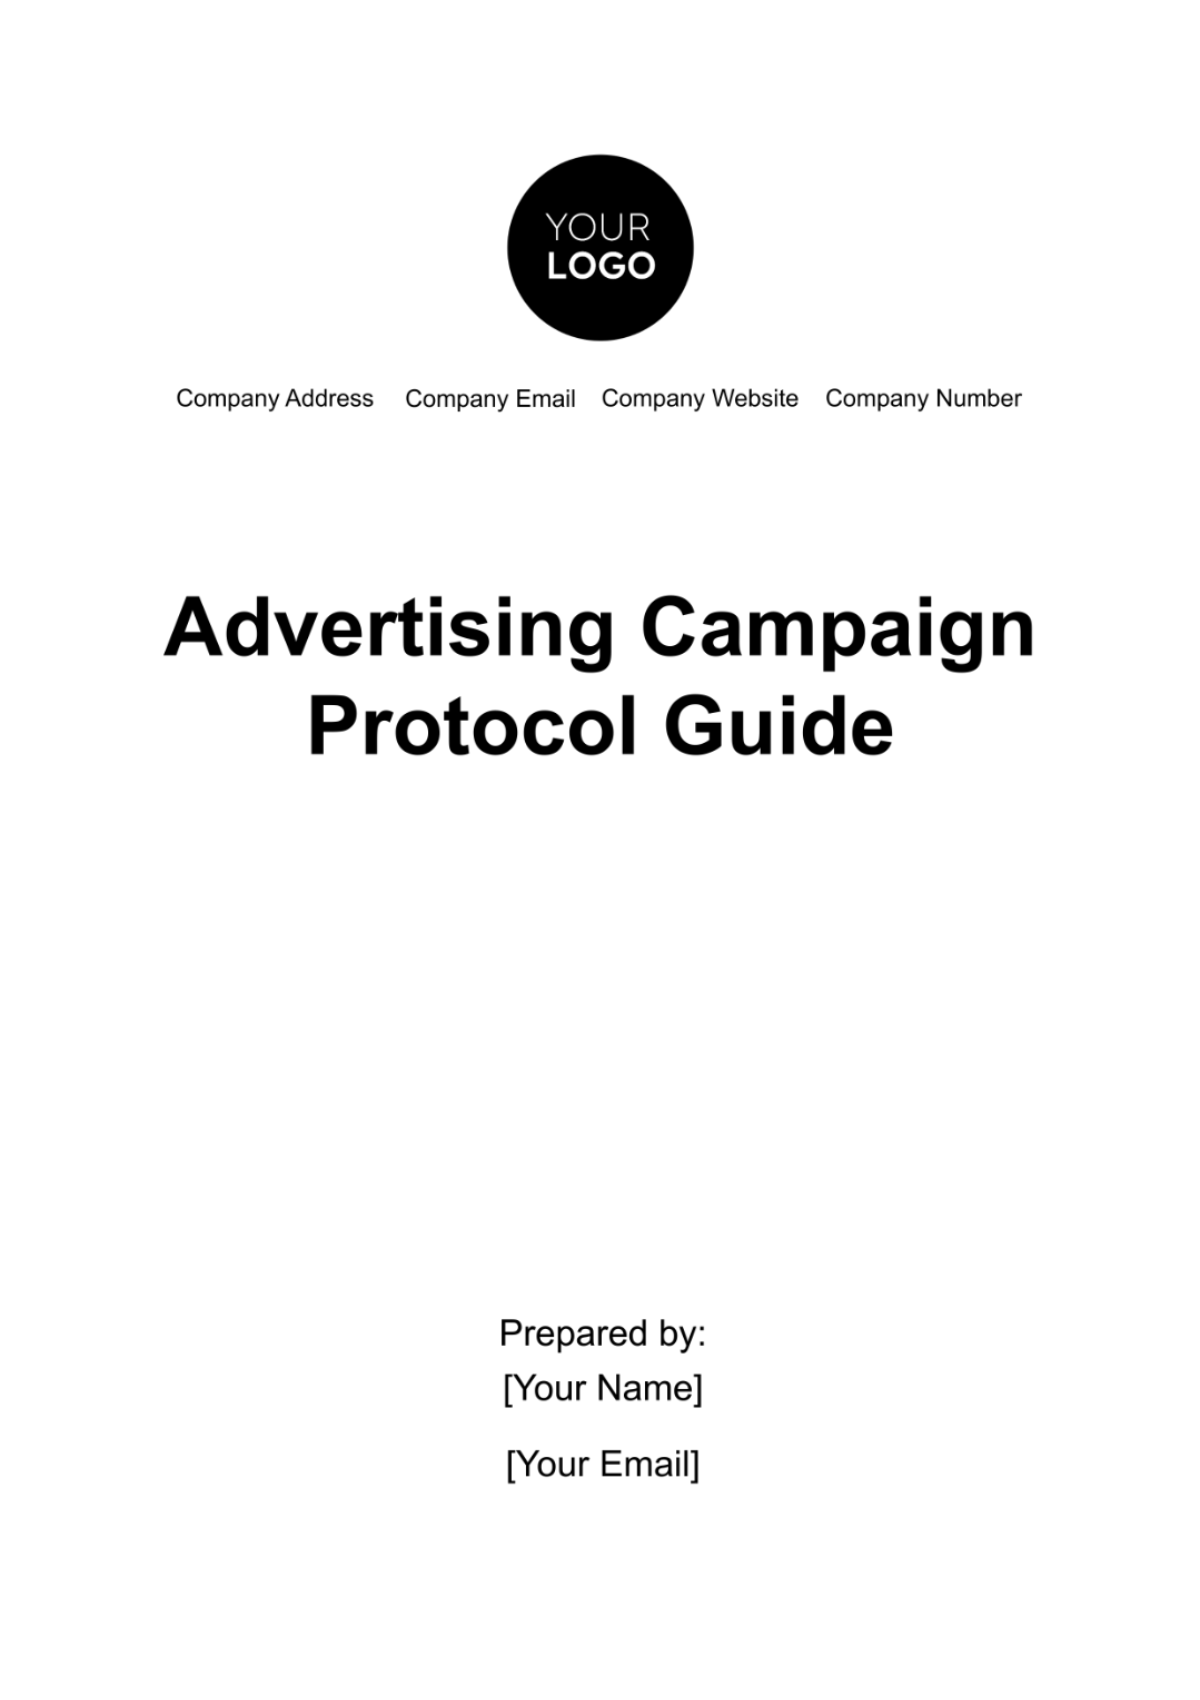 Free Advertising Campaign Protocol Guide Template